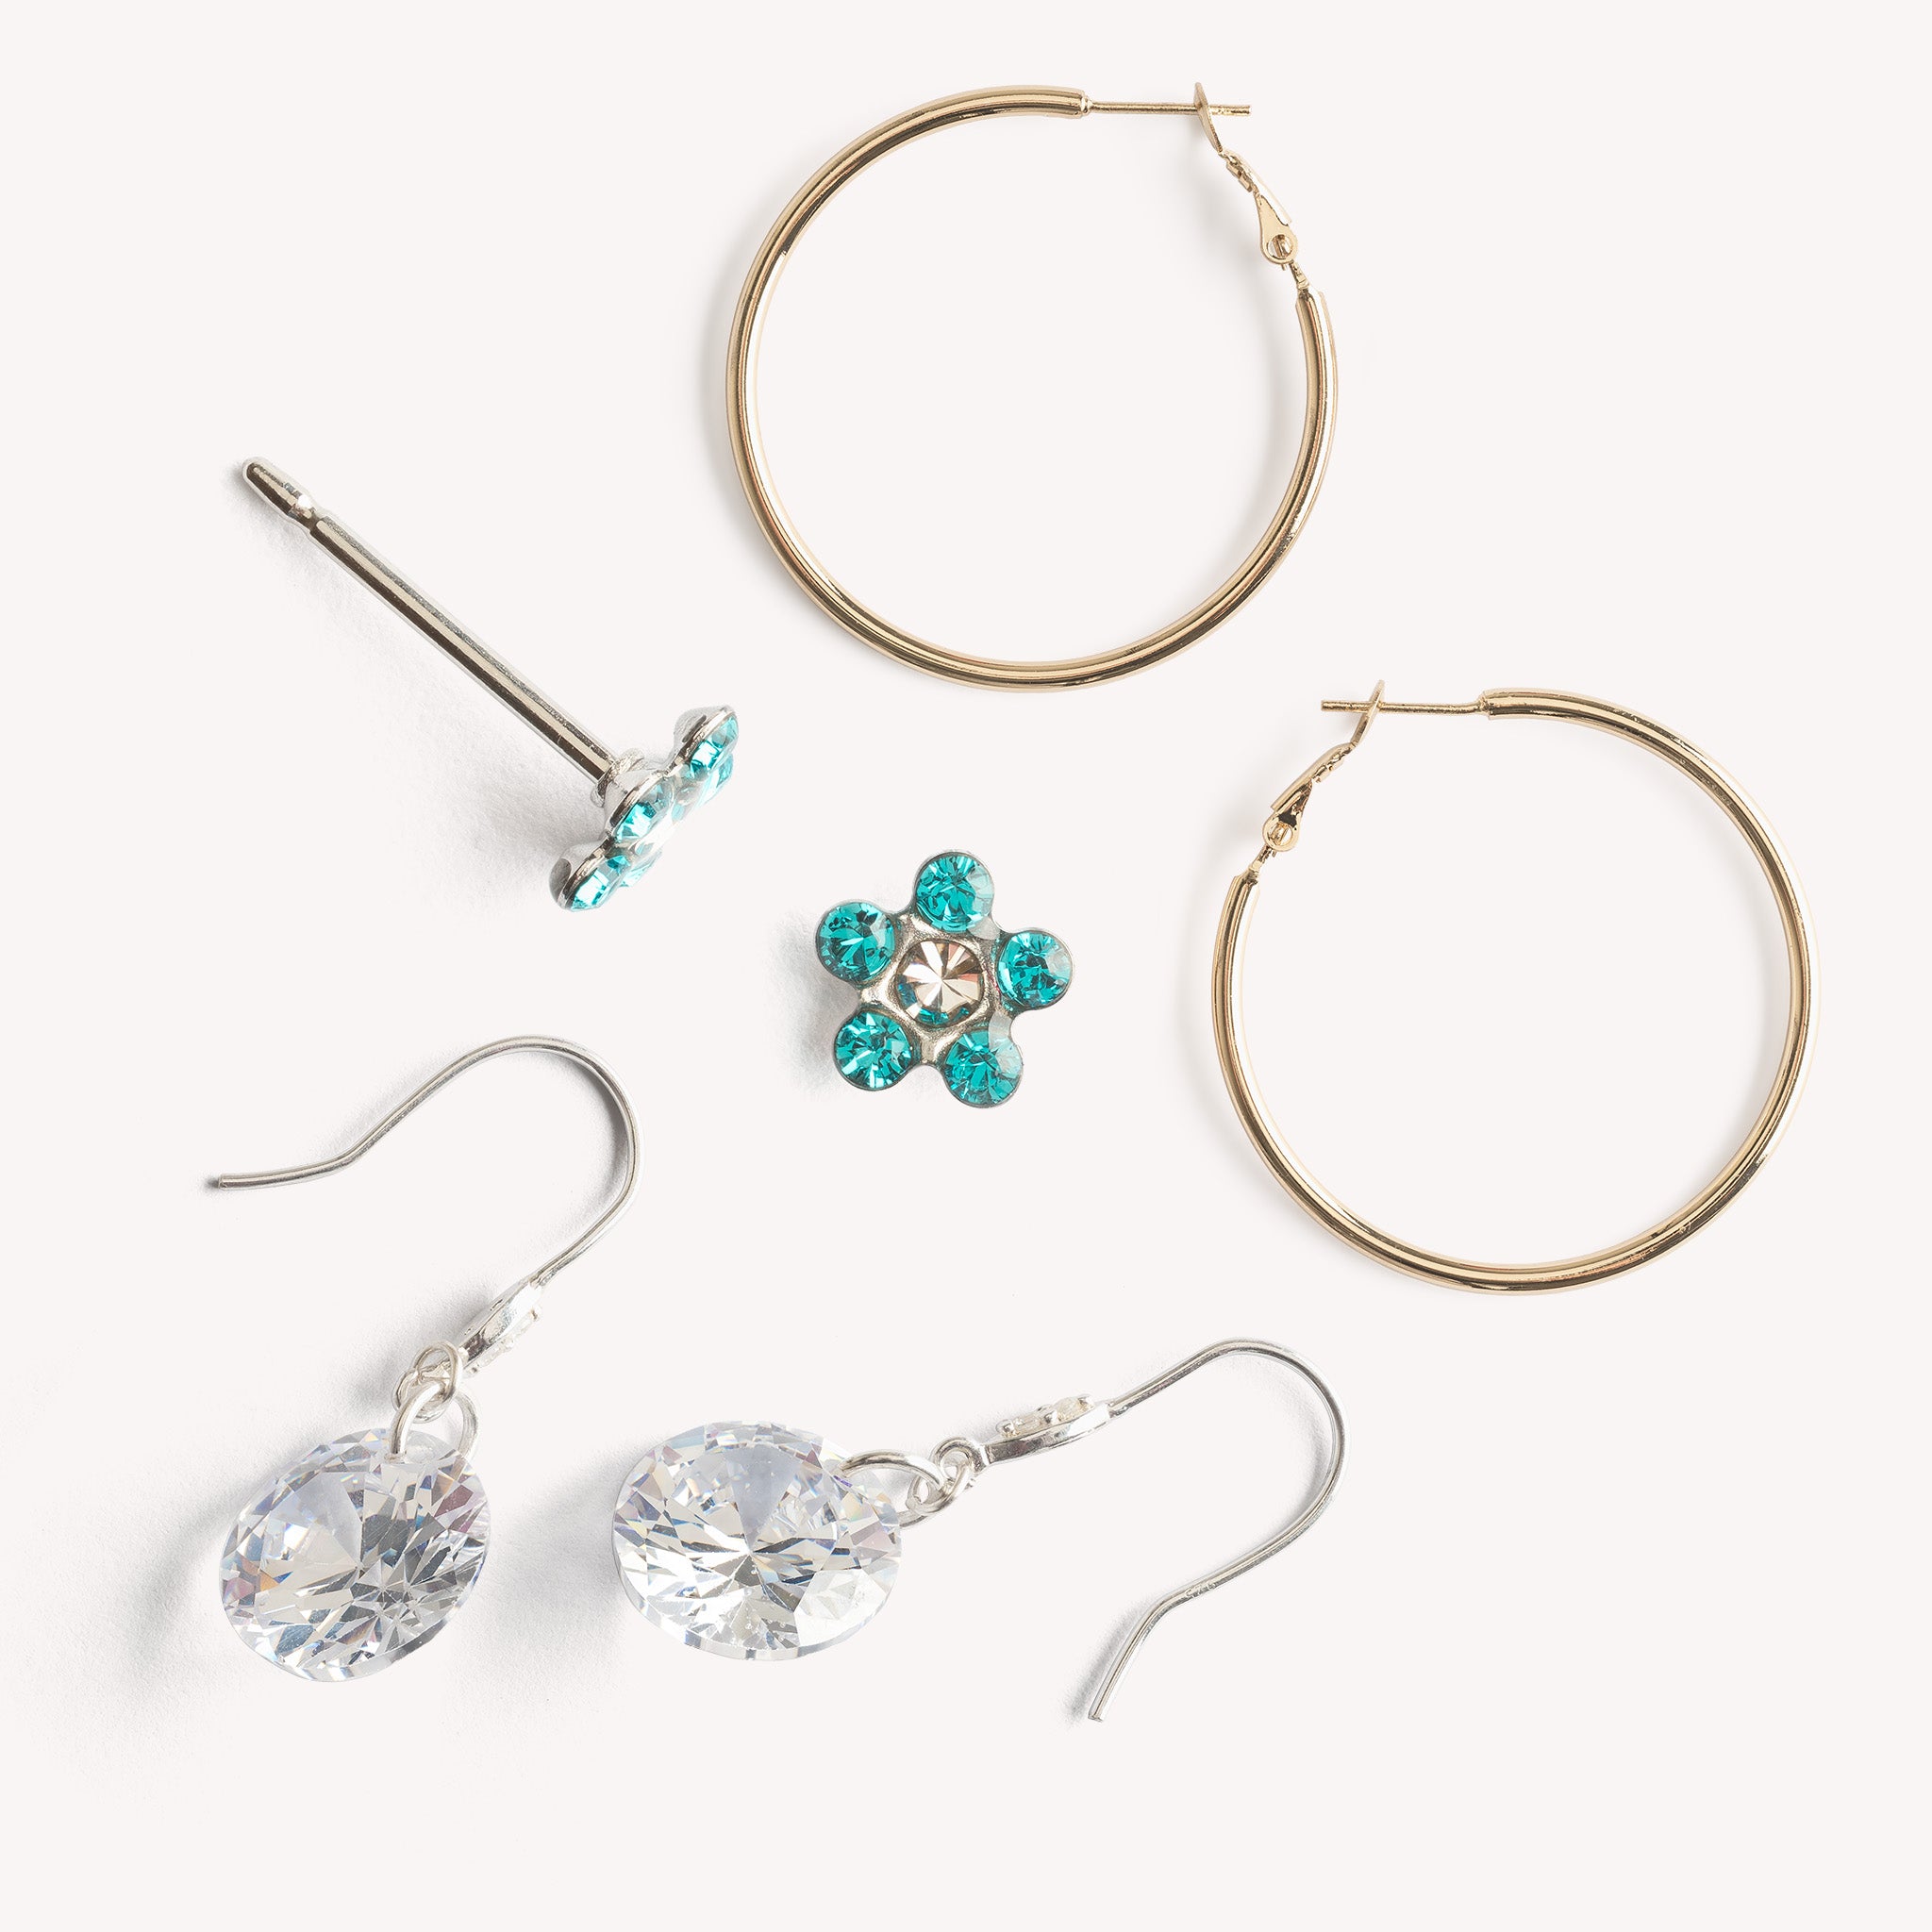 Hypoallergenic Metals: Which Earrings & Jewelry are Best for